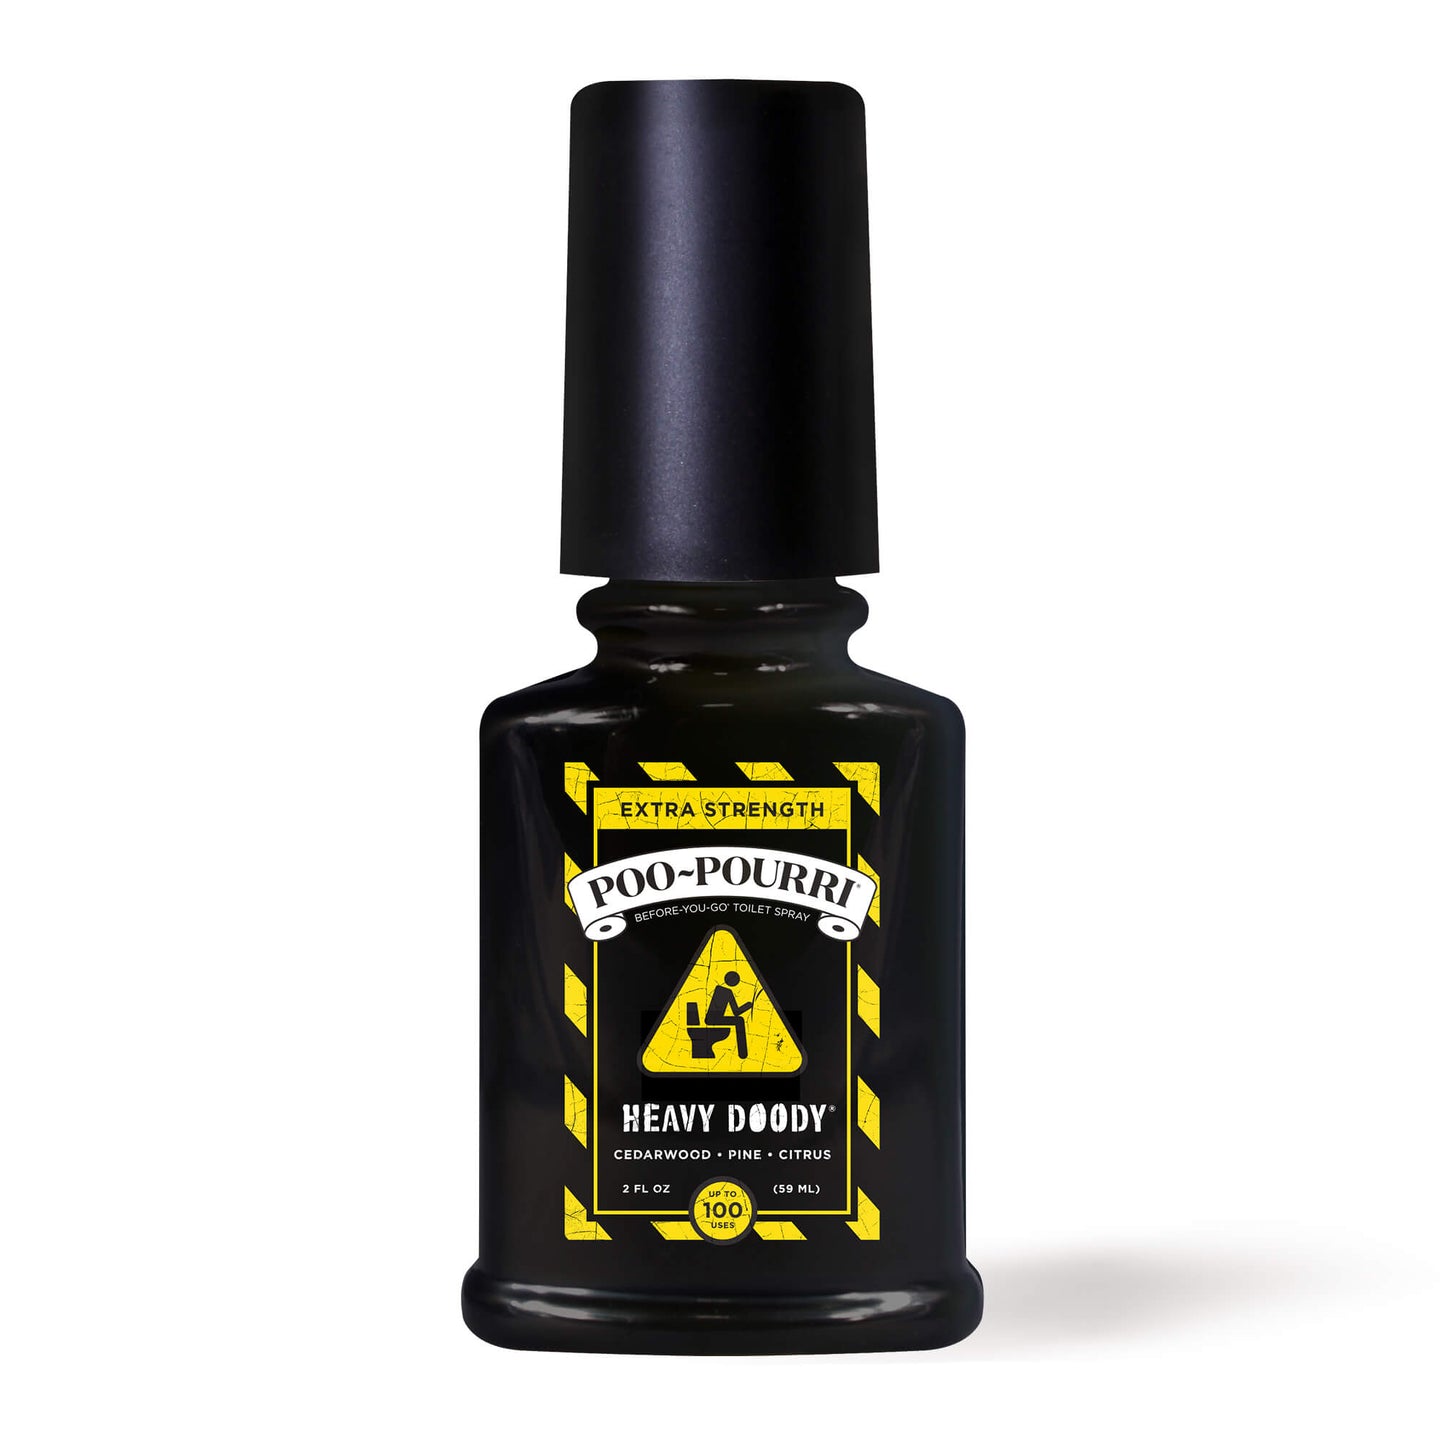 heavy doody spray bottle is black with black and yellow label on a white background